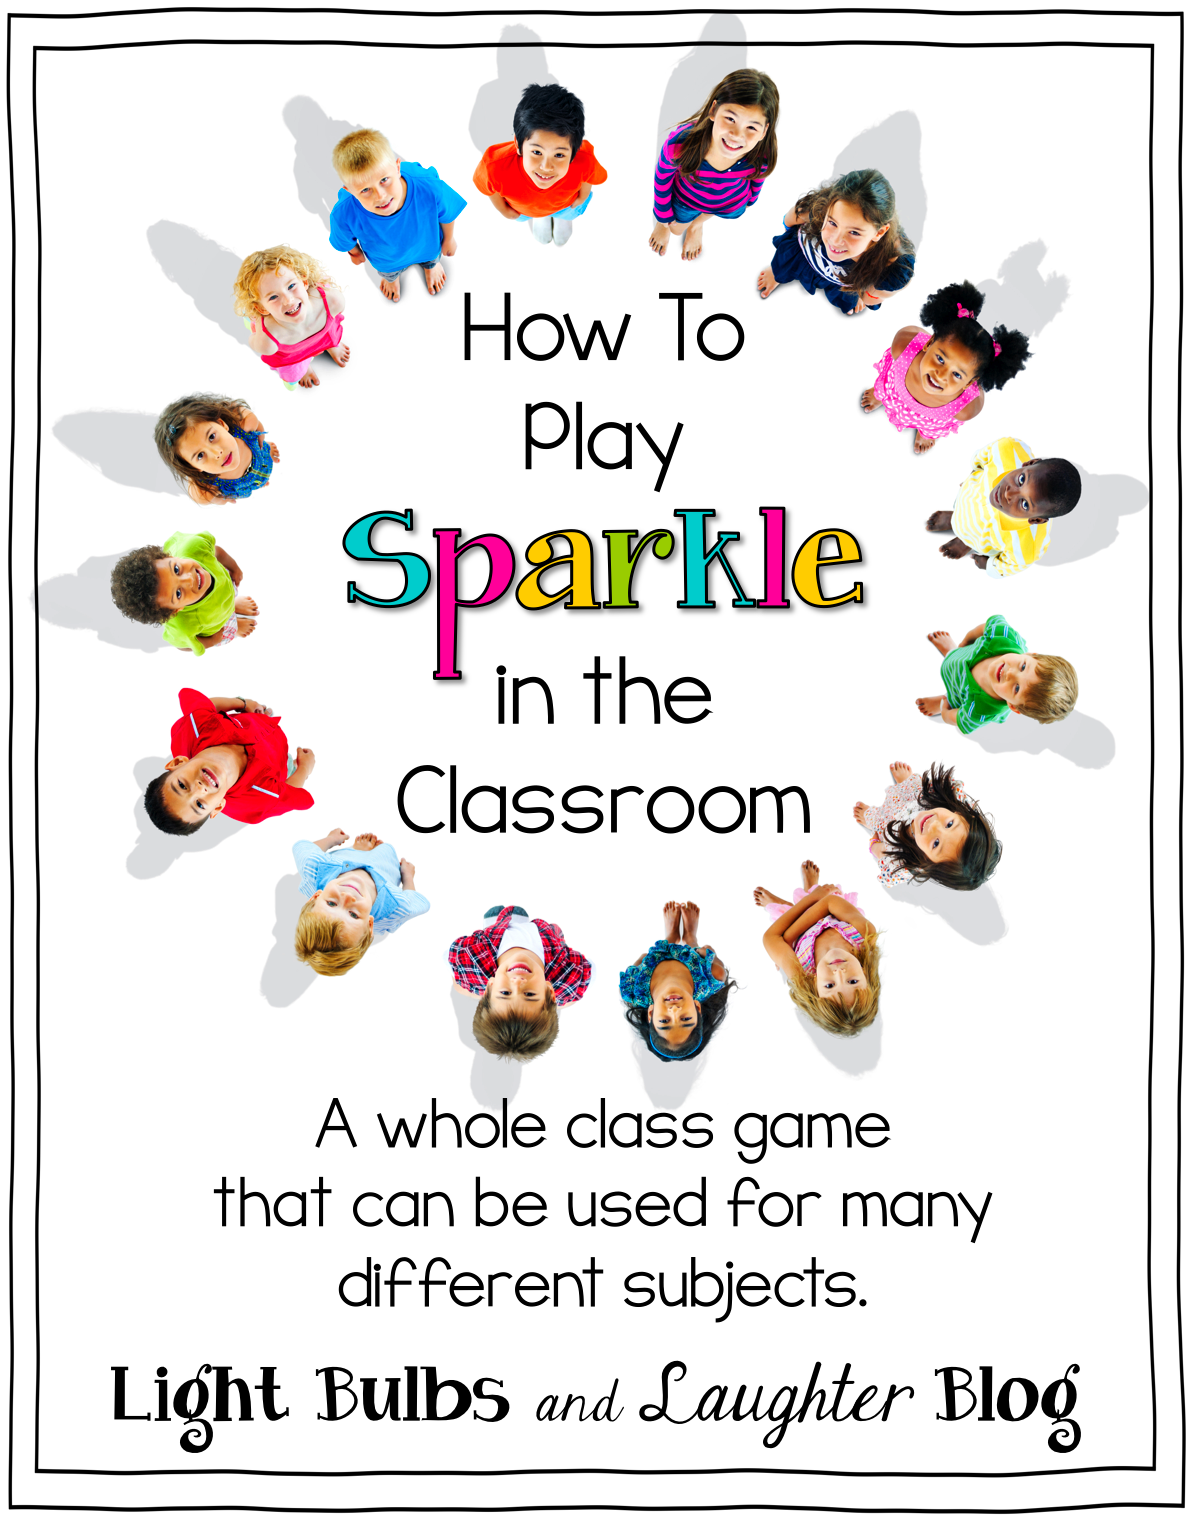 How To Play Sparkle in the Classroom - Light Bulbs and Laughter Blog